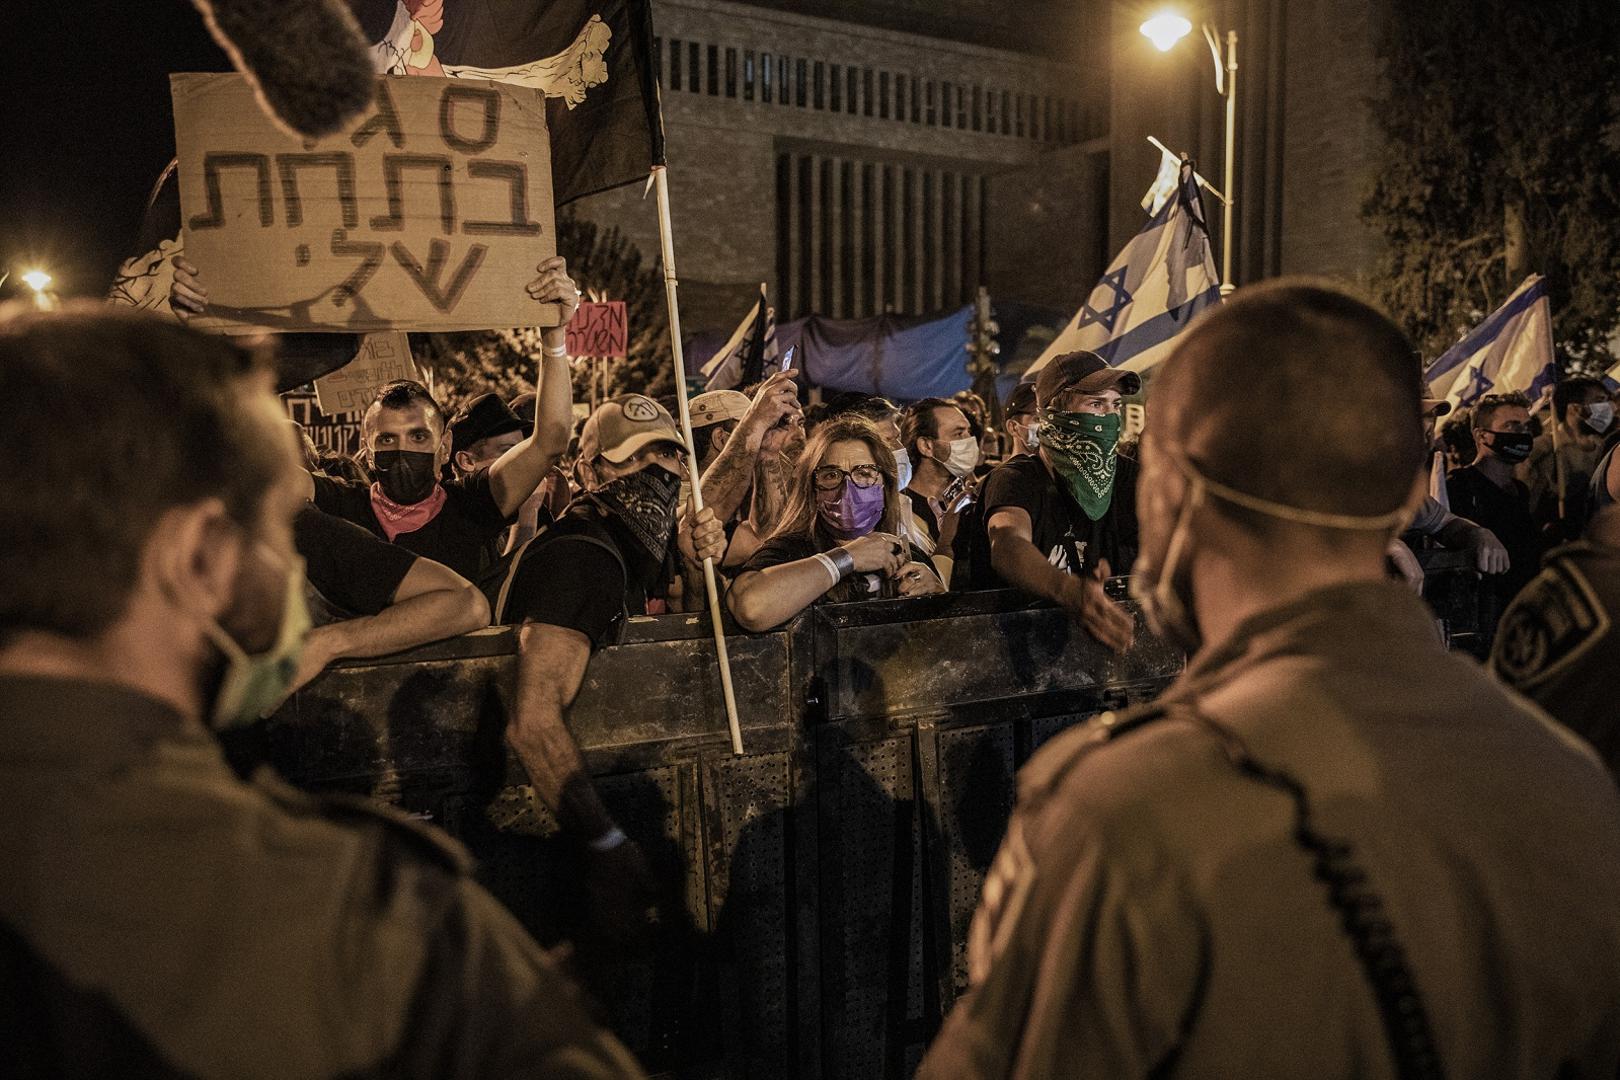 20 September 2020, Israel, Jerusalem: Israeli policemen watch as people hold placards and shout slogans during an anti-government demonstration against corruption outside the residence of Israeli Prime Minister Benjamin Netanyahu. Photo: Ilia Yefimovich/dpa /DPA/PIXSELL